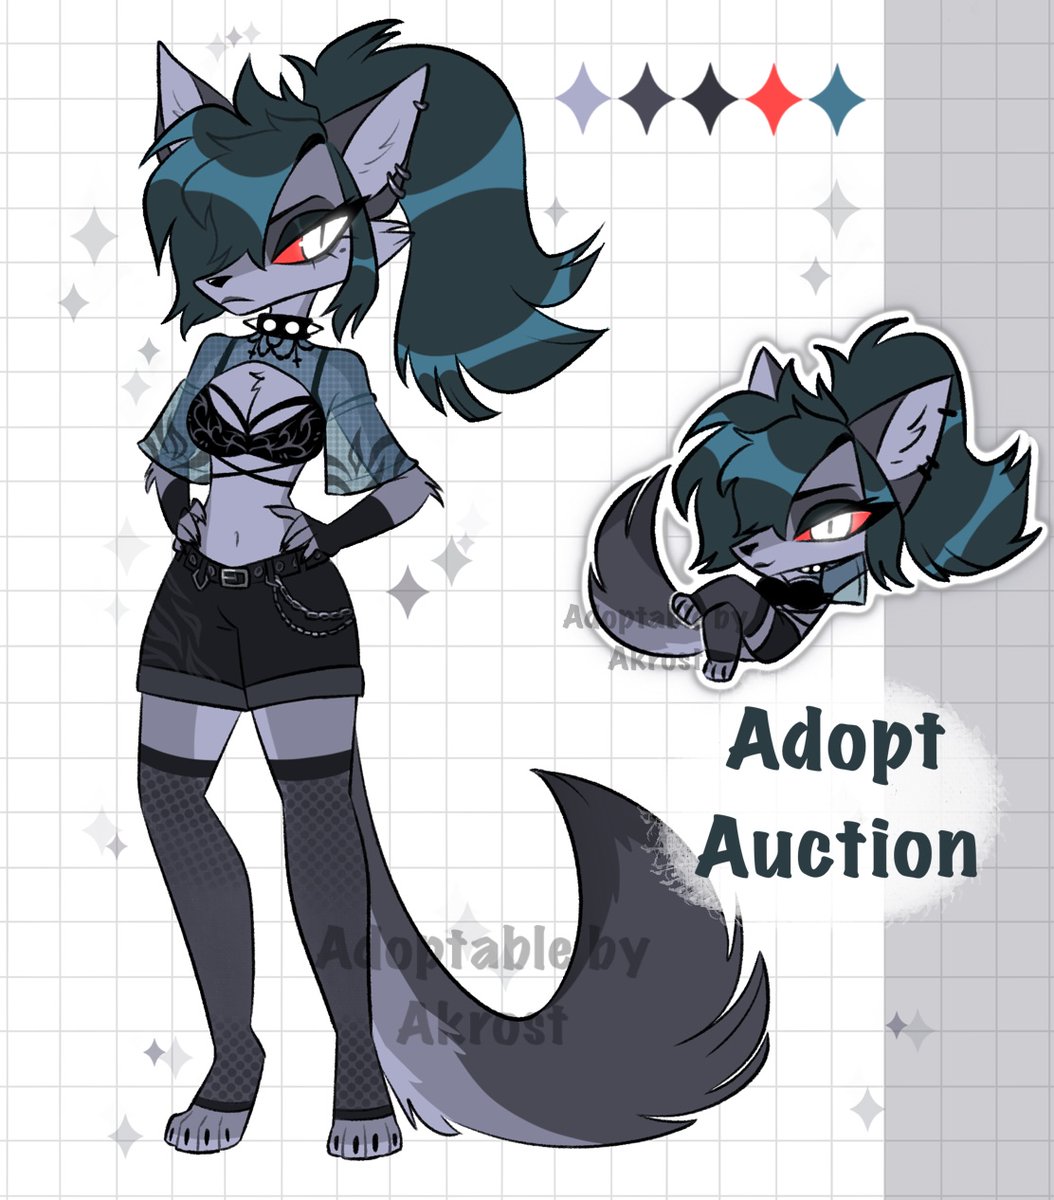 I made my first hellhound adoptable <3
link to the auction below~

#adoptable #adoptauction